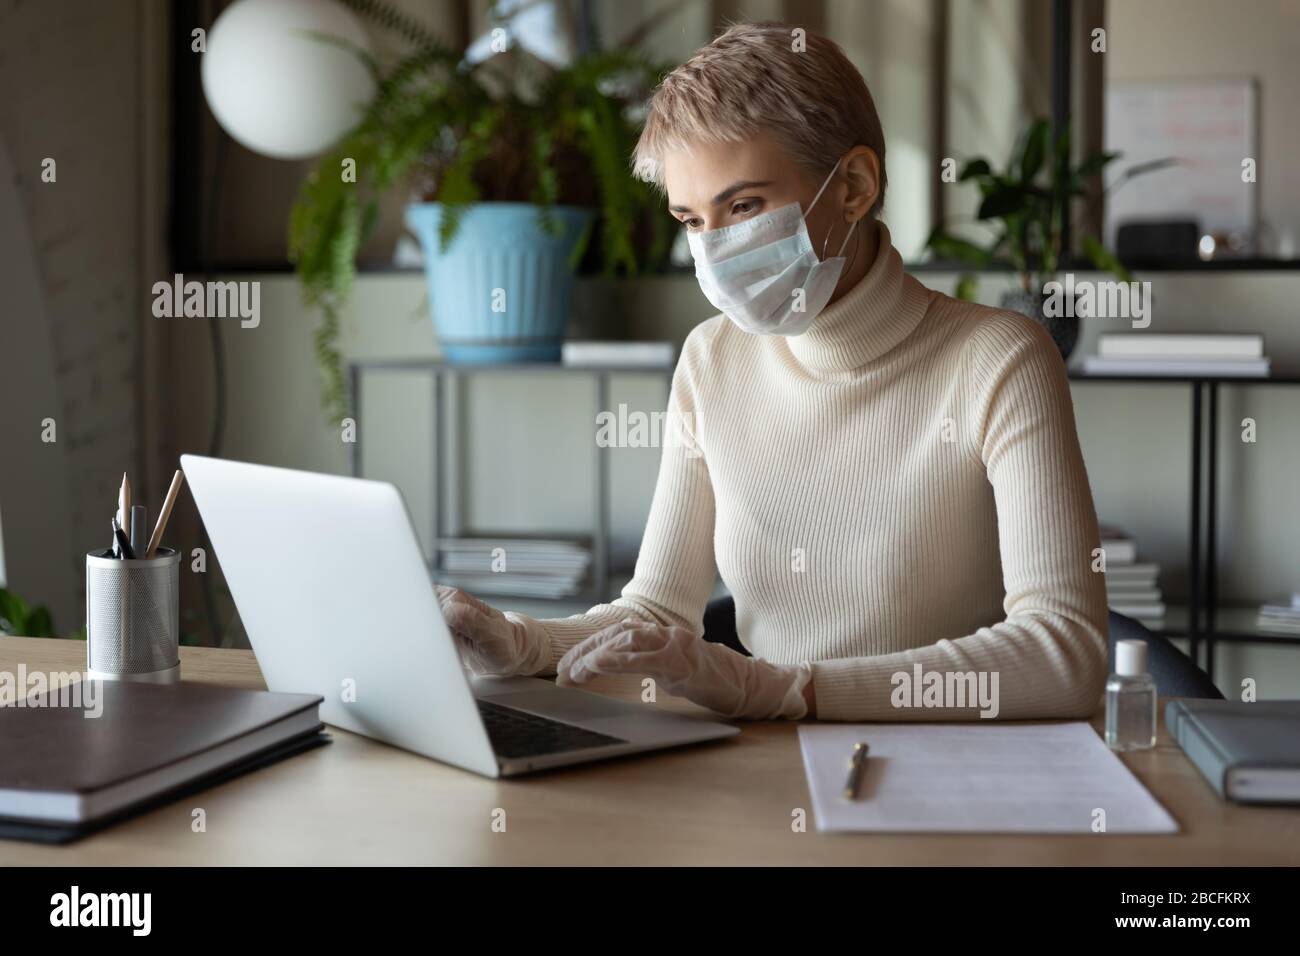 Concentrated young female employee working in medical mask and gloves. Stock Photo